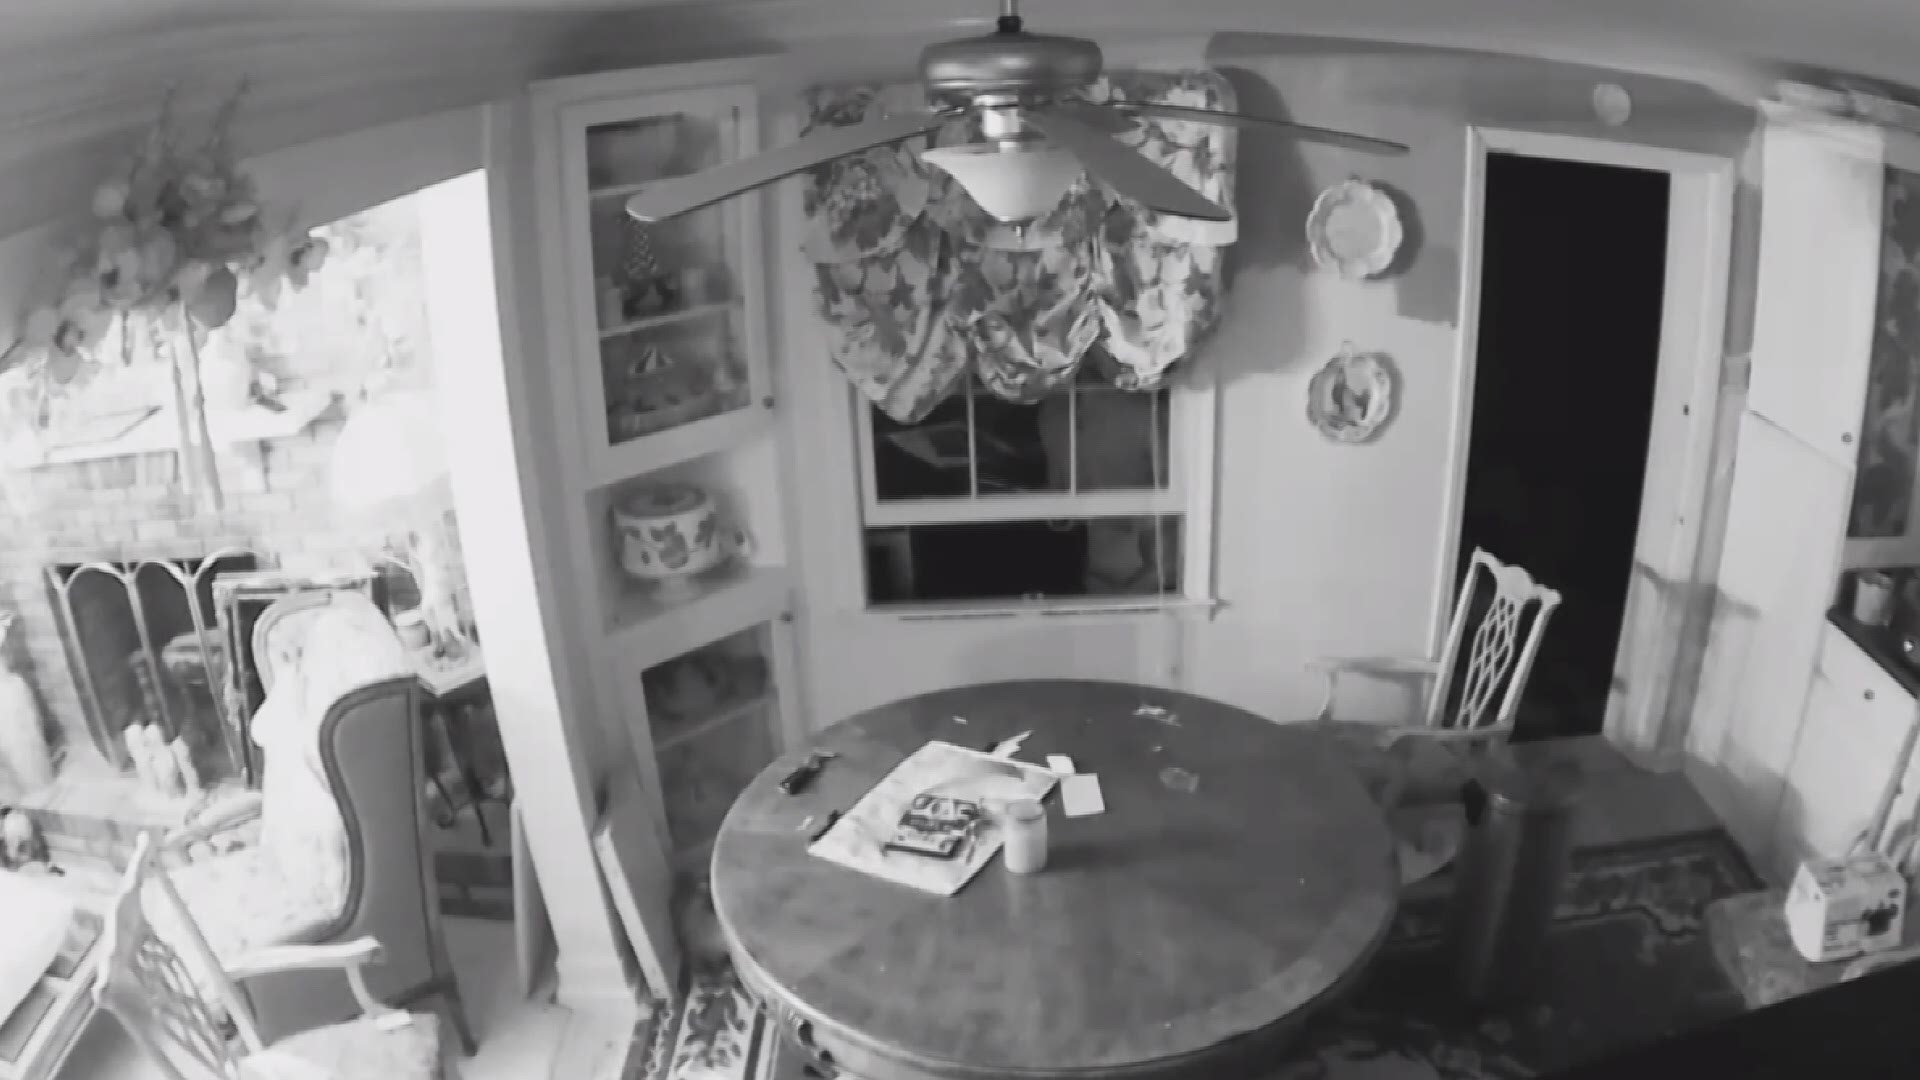 Surveillance shows suspect entering home and stealing items